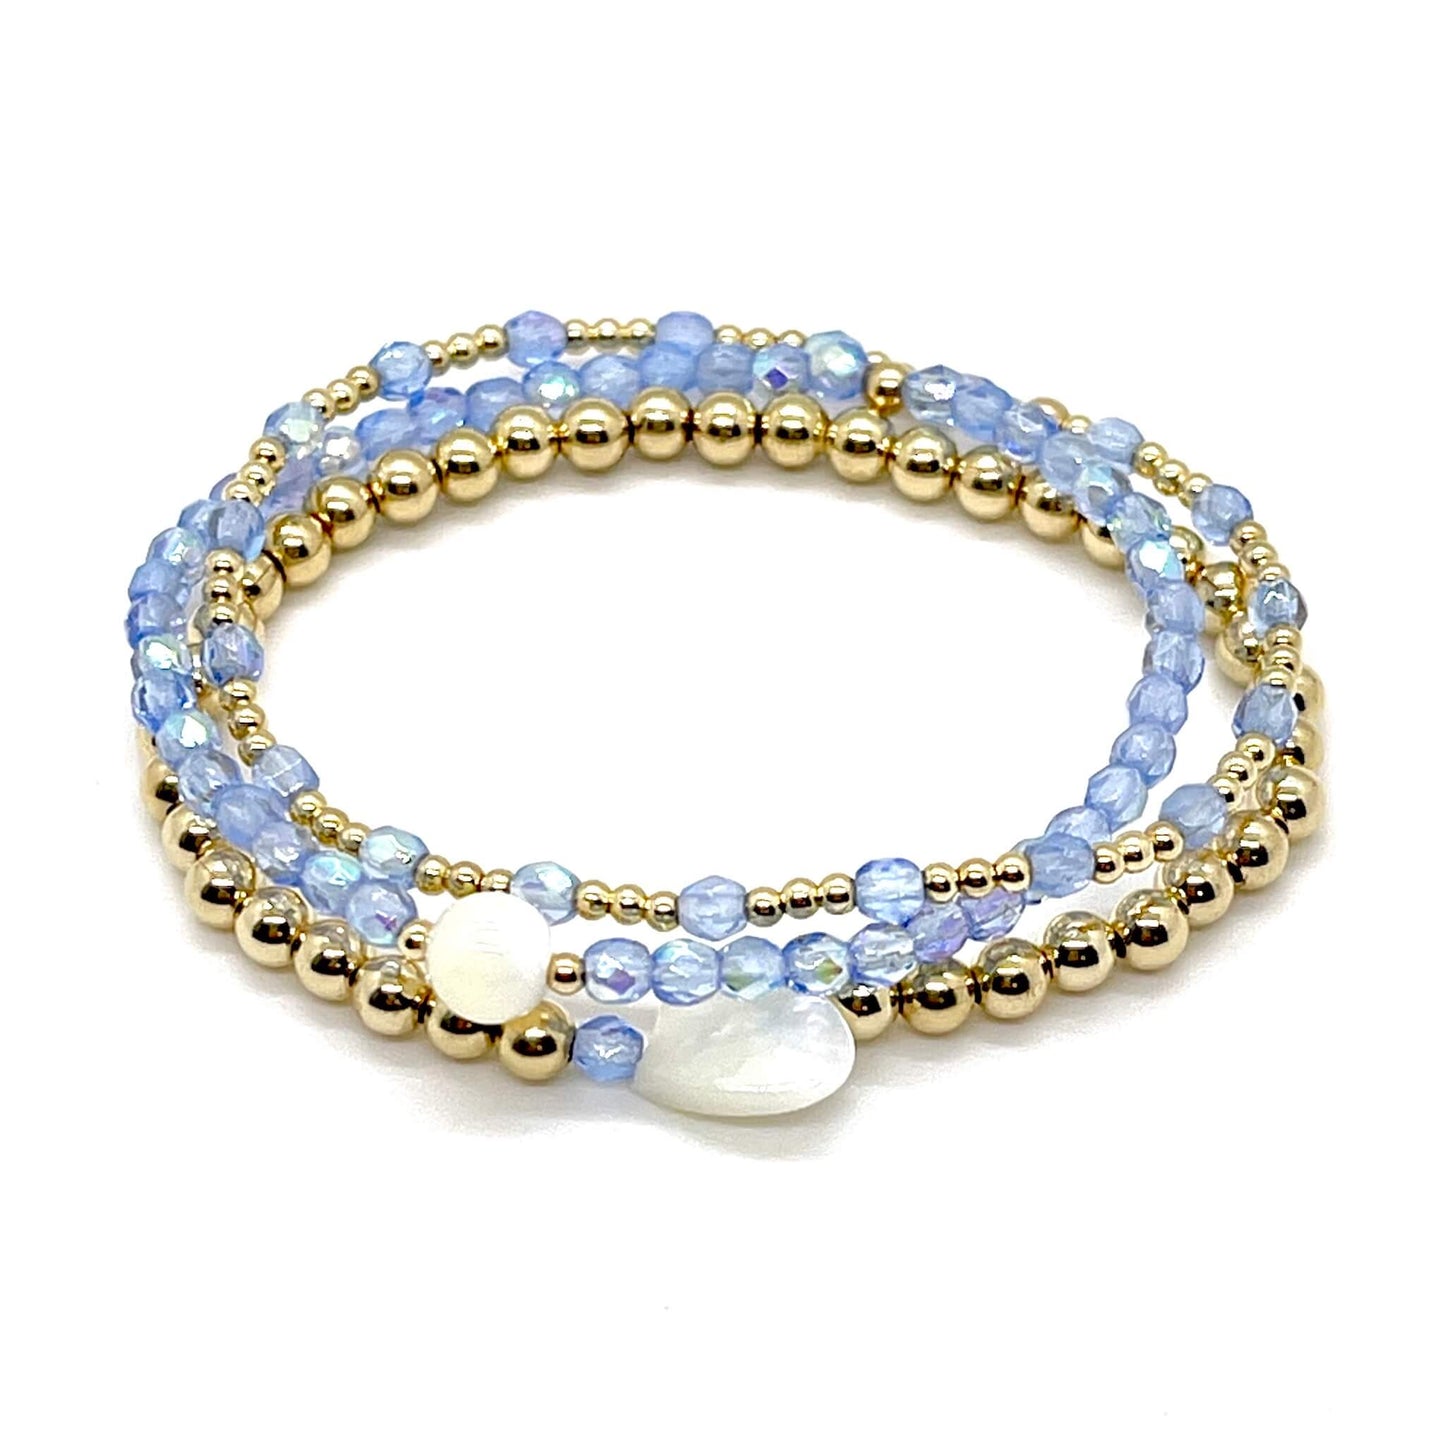 Light blue crystal and gold bracelet stack of 3. Womens handmade stretch bracelets wtih round and heart shaped mother-of-pearl accent beads.